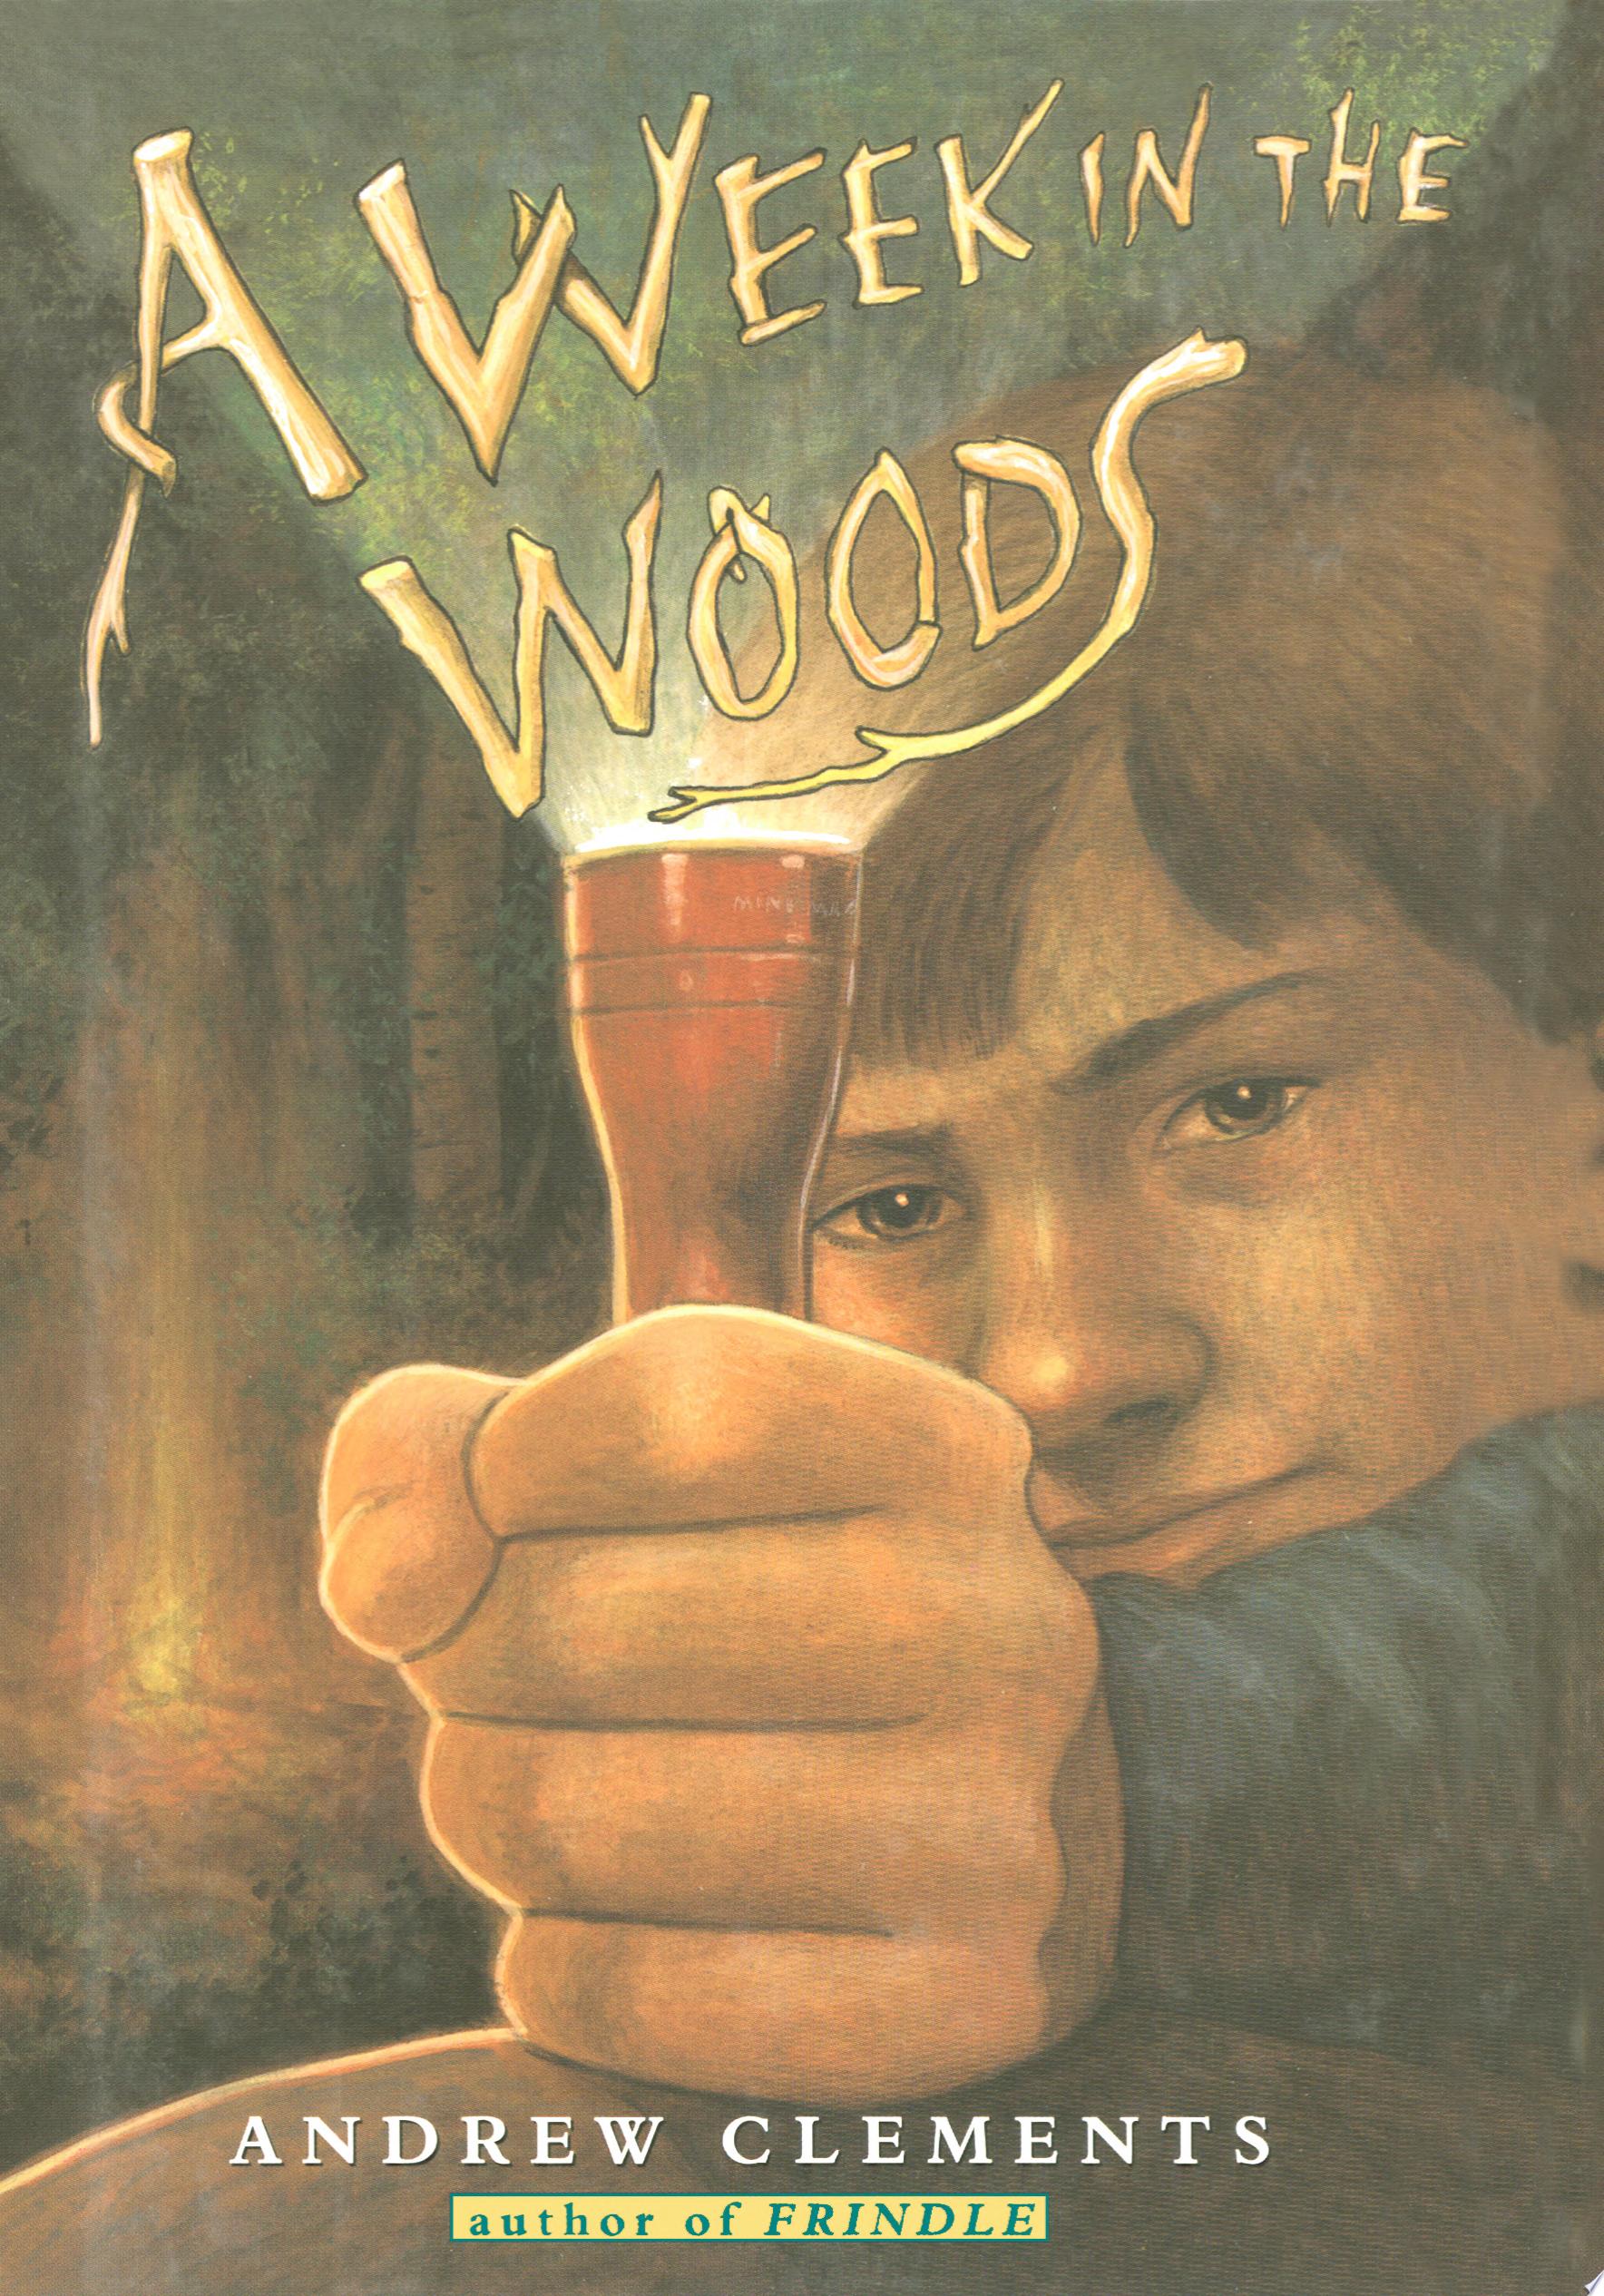 Image for "A Week in the Woods"